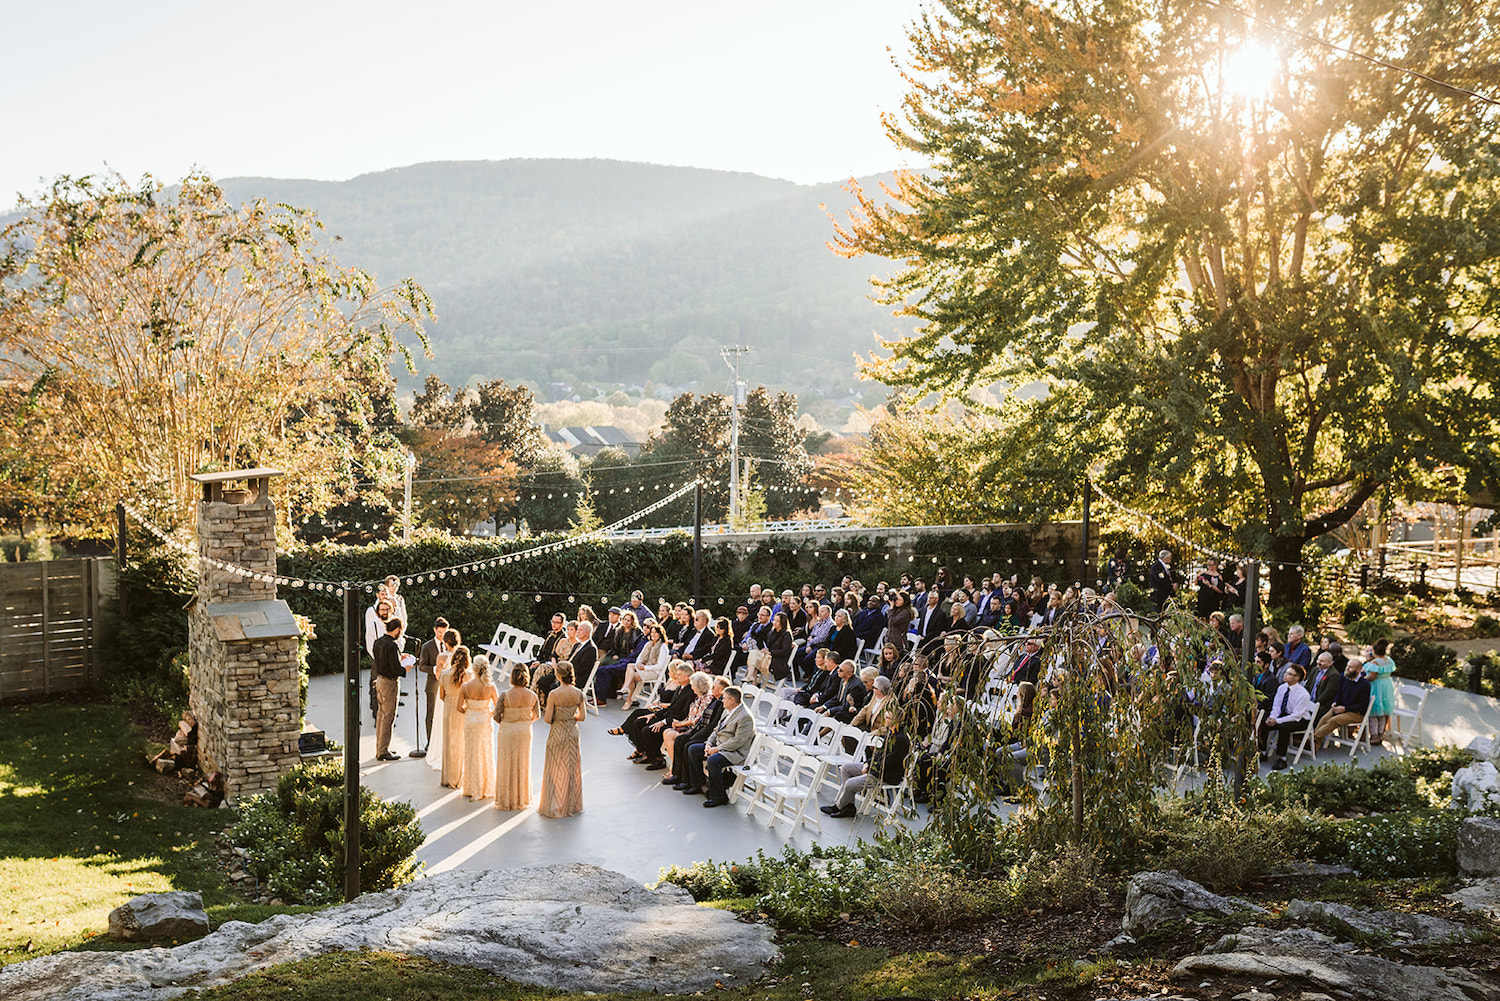 Chattanooga wedding photographer favorite overlooking wedding ceremony and views of Lookout Mountain and valley